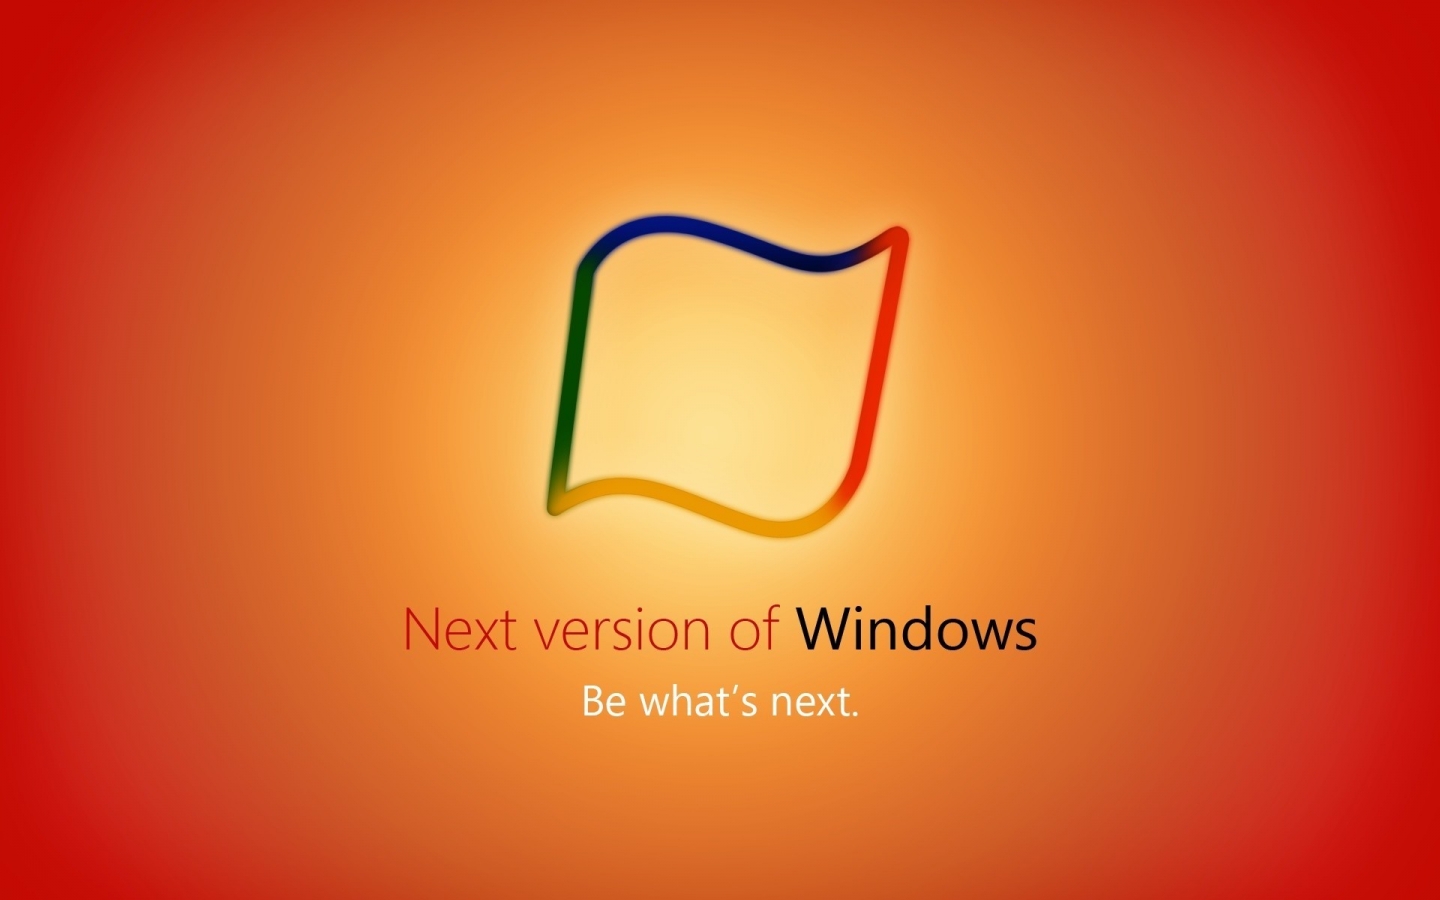 Next Version of Windows for 1440 x 900 widescreen resolution